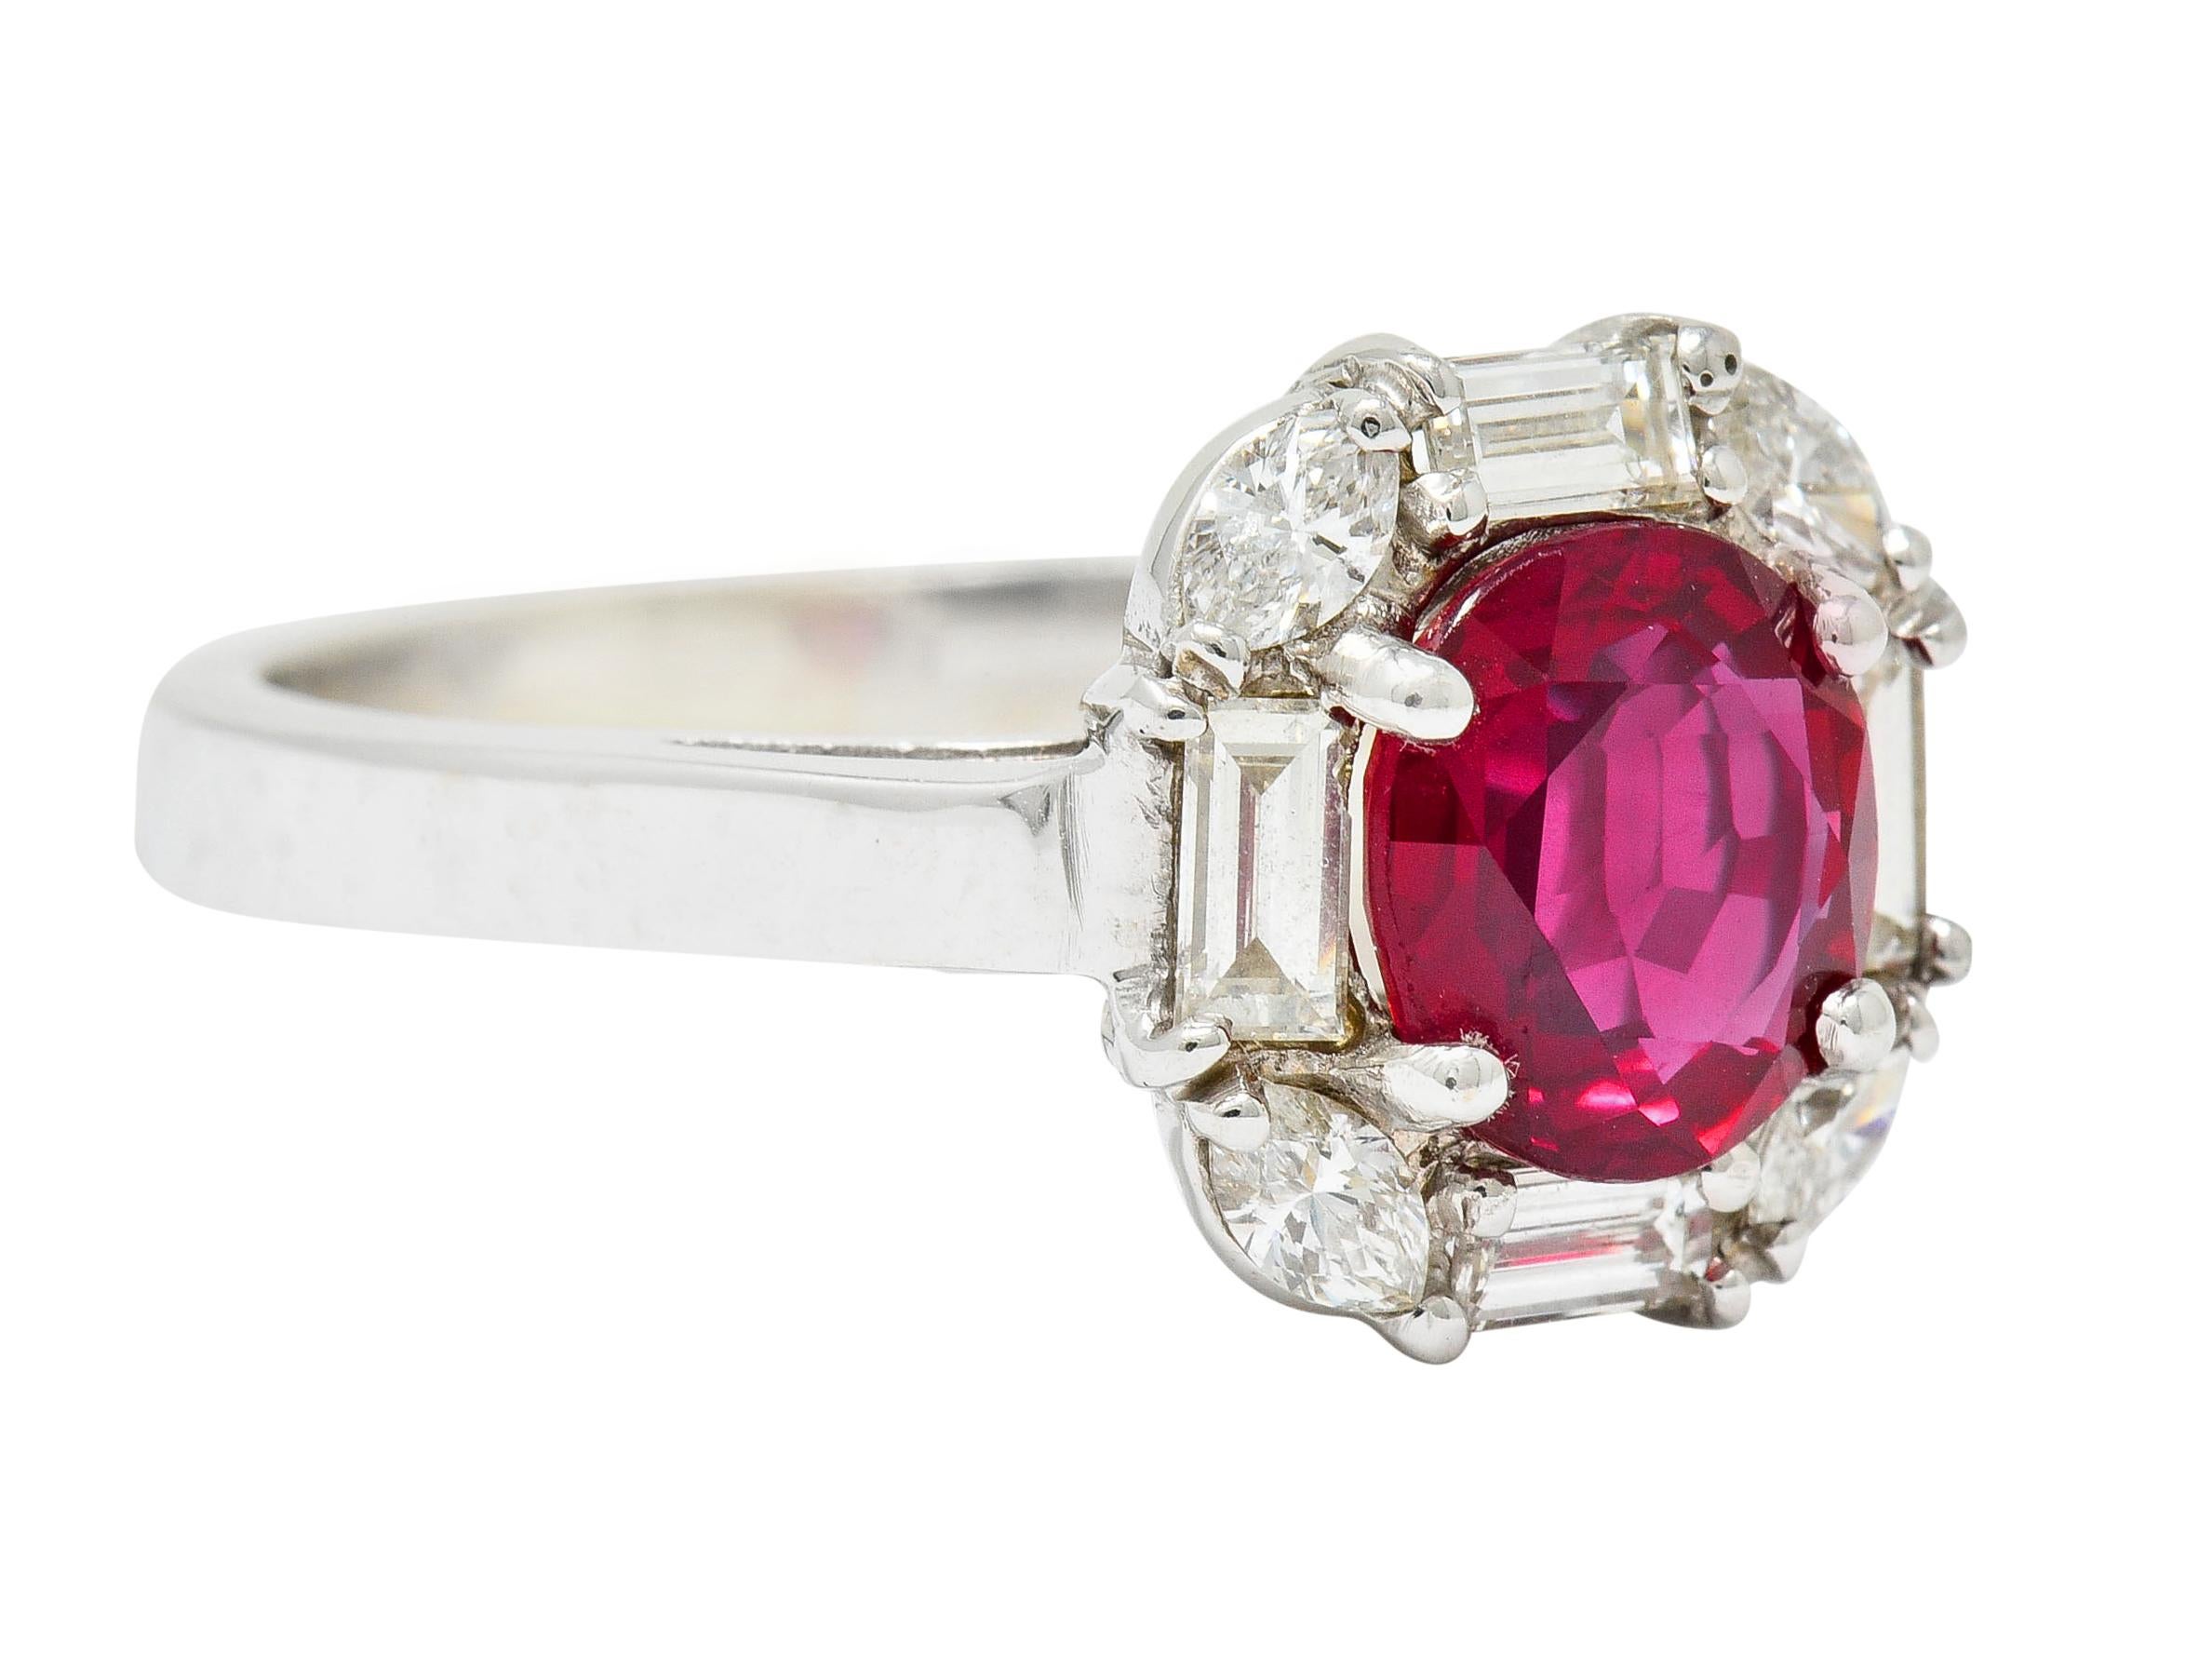 Cluster style ring centering an oval mixed cut Mozambique ruby weighing approximately 1.80 carats, intensely red in color

With baguette cut diamonds at each cardinal direction and marquise cut diamonds at each corner forming a nice cushion shaped